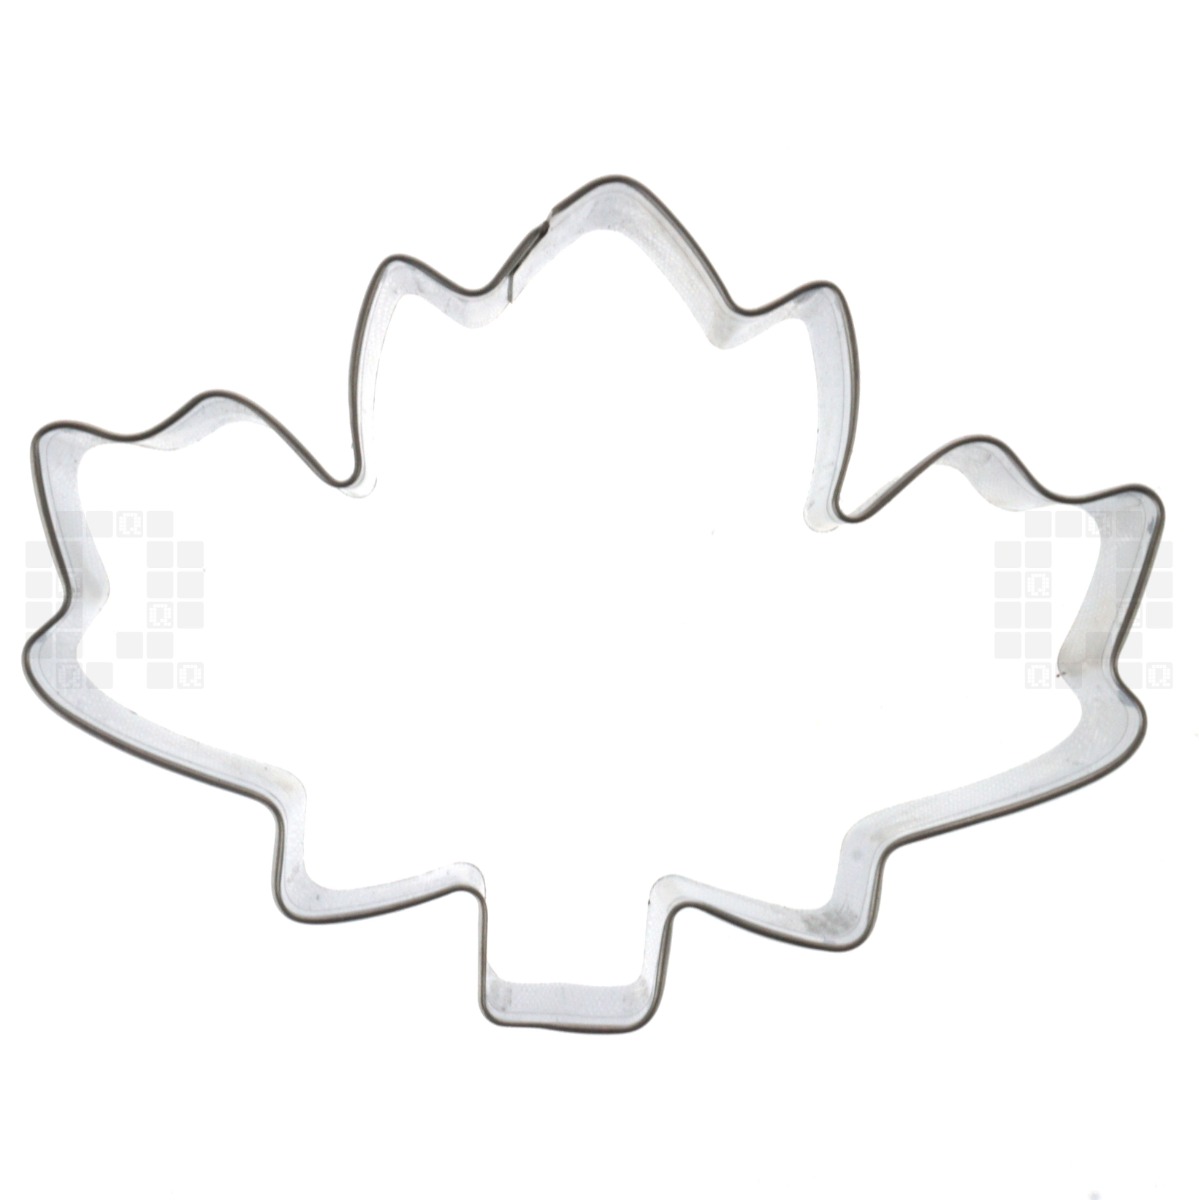 Fox Run Brands 3407 3" Maple Leaf Stainless Steel Pastry Cookie Cutter